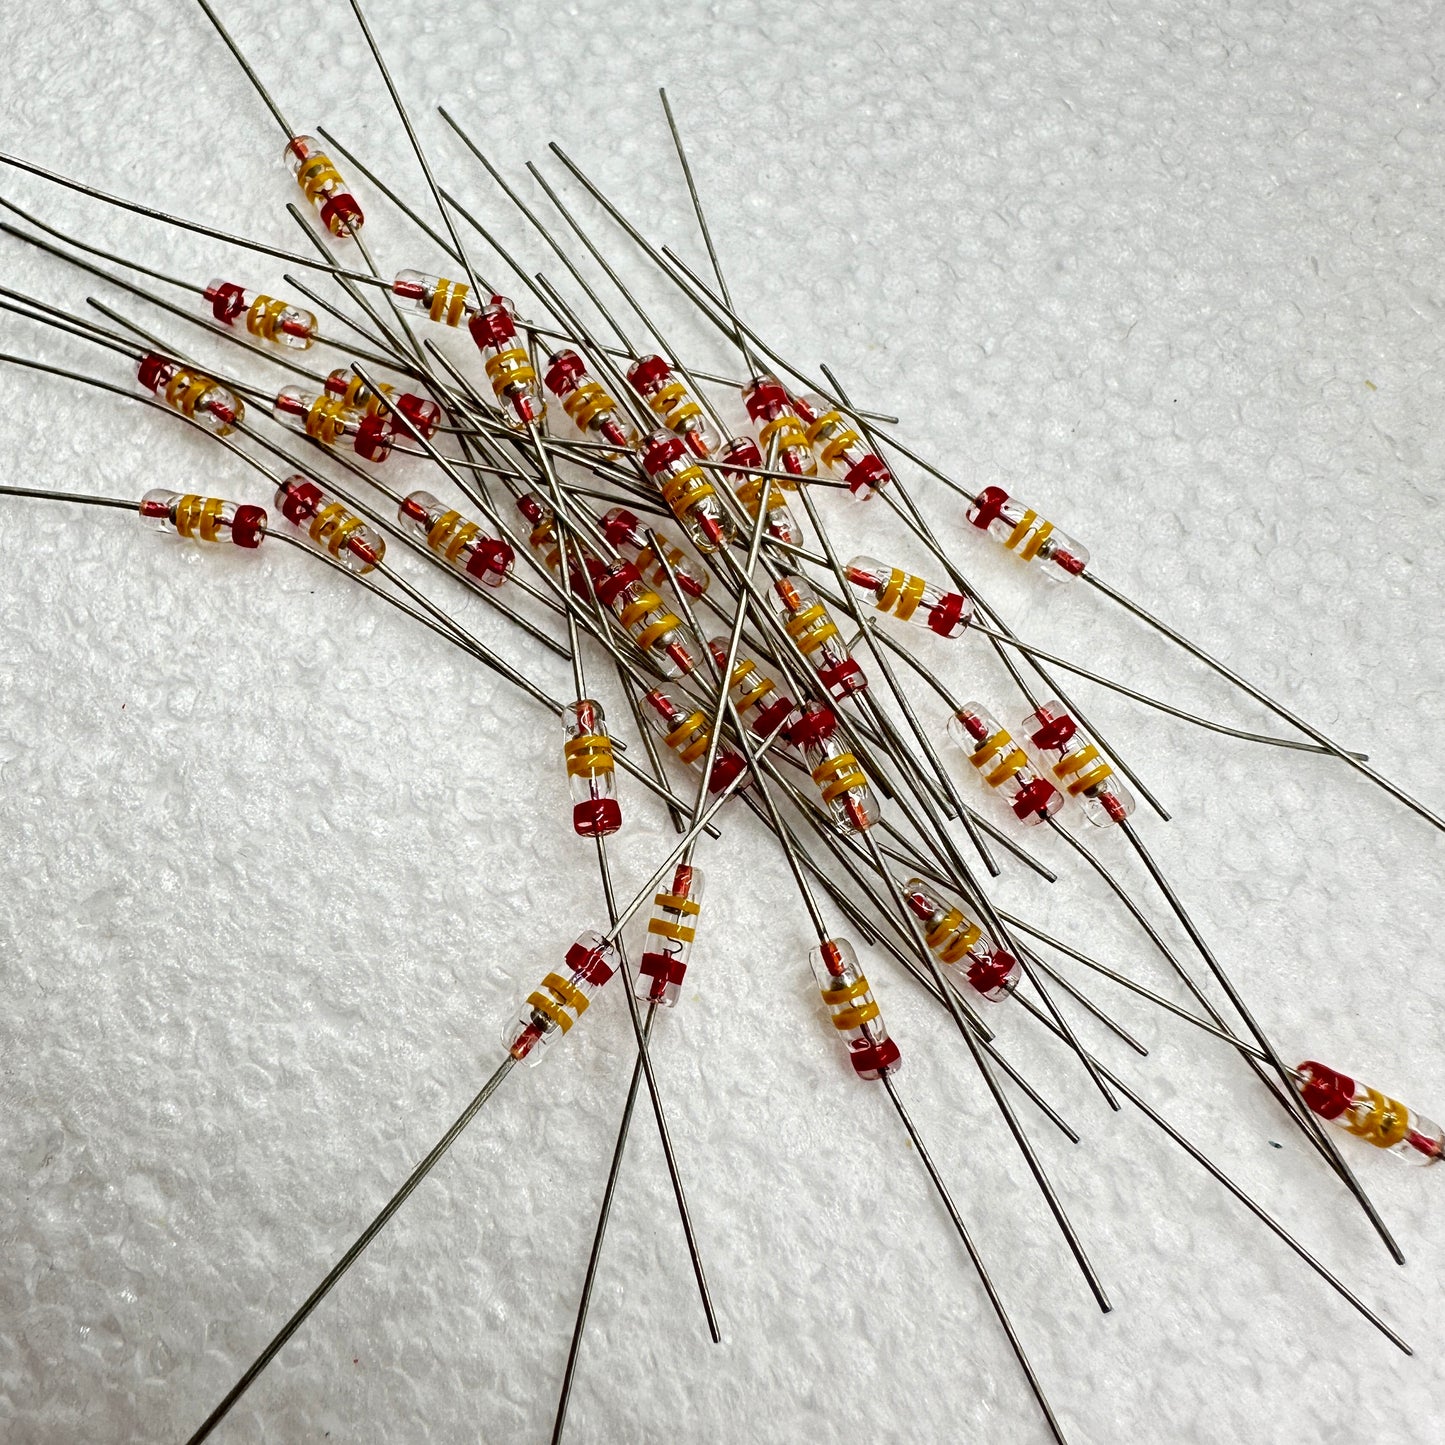 10 PACK D9I NOS Russian Soviet Military Germanium Diodes